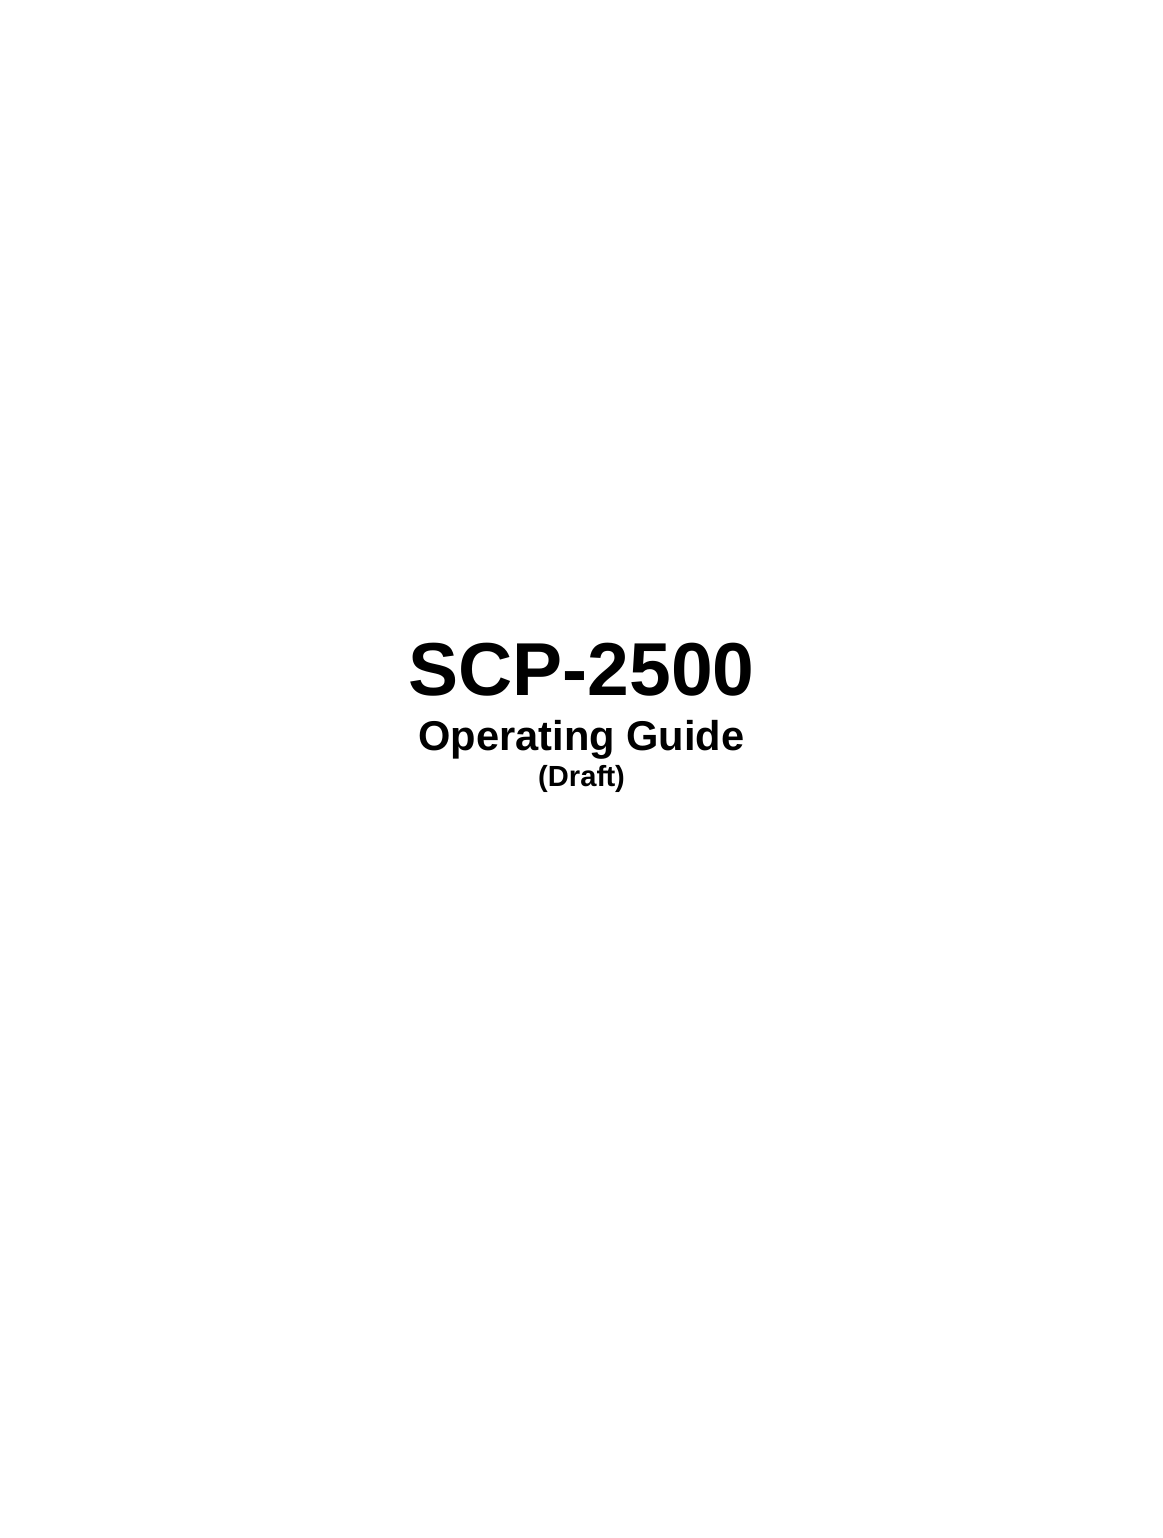                   SCP-2500 Operating Guide (Draft) 